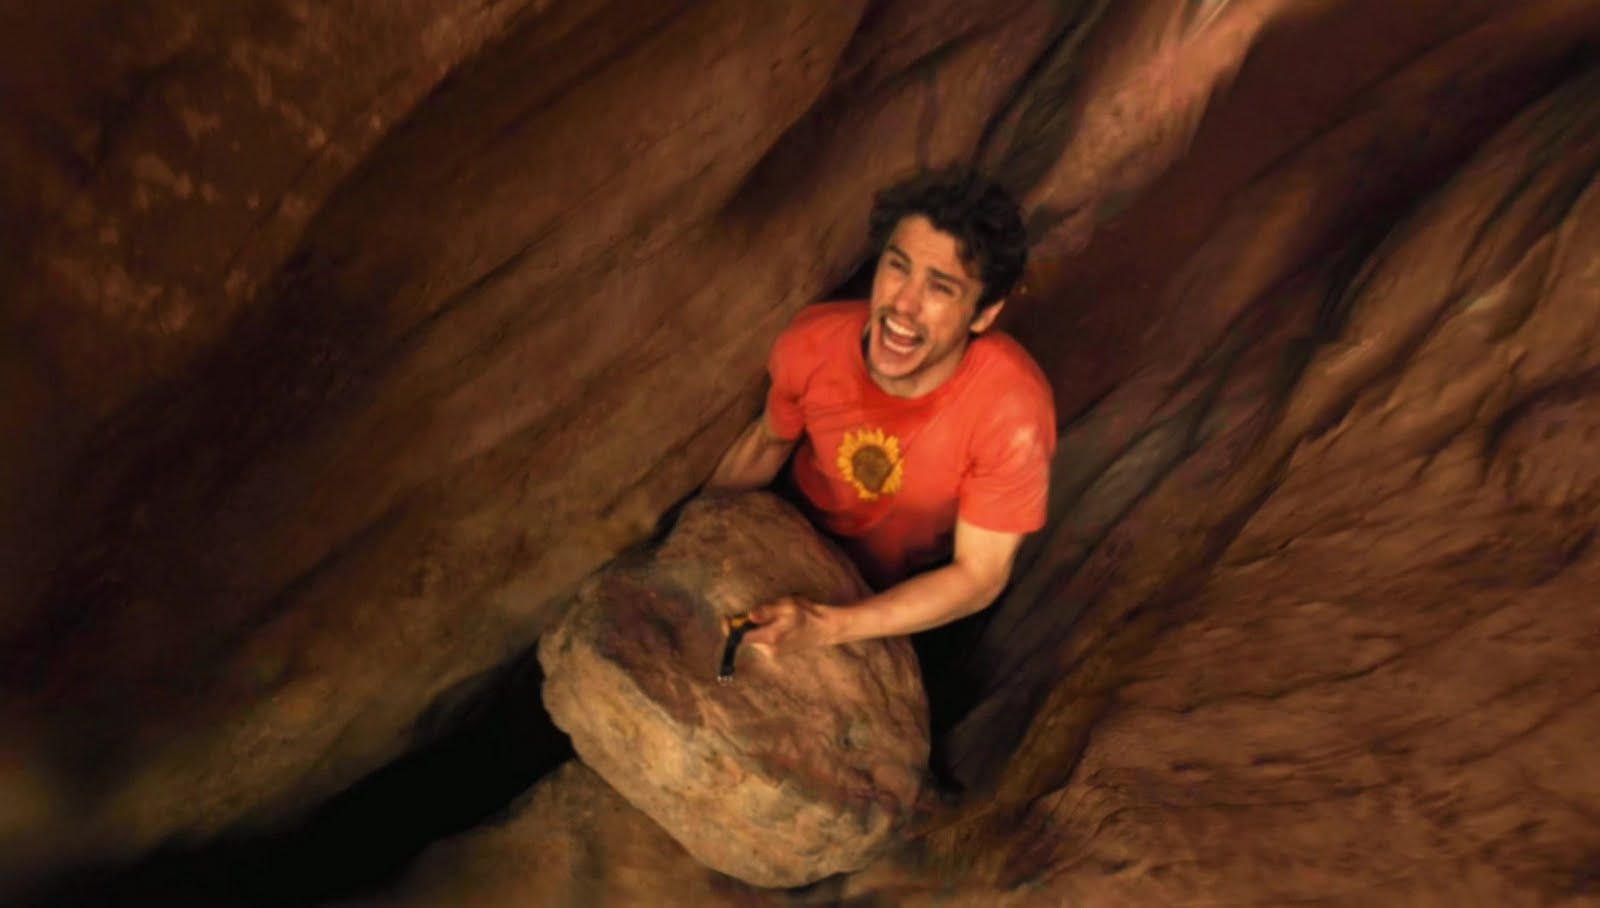 127 hours download full movie in hindi